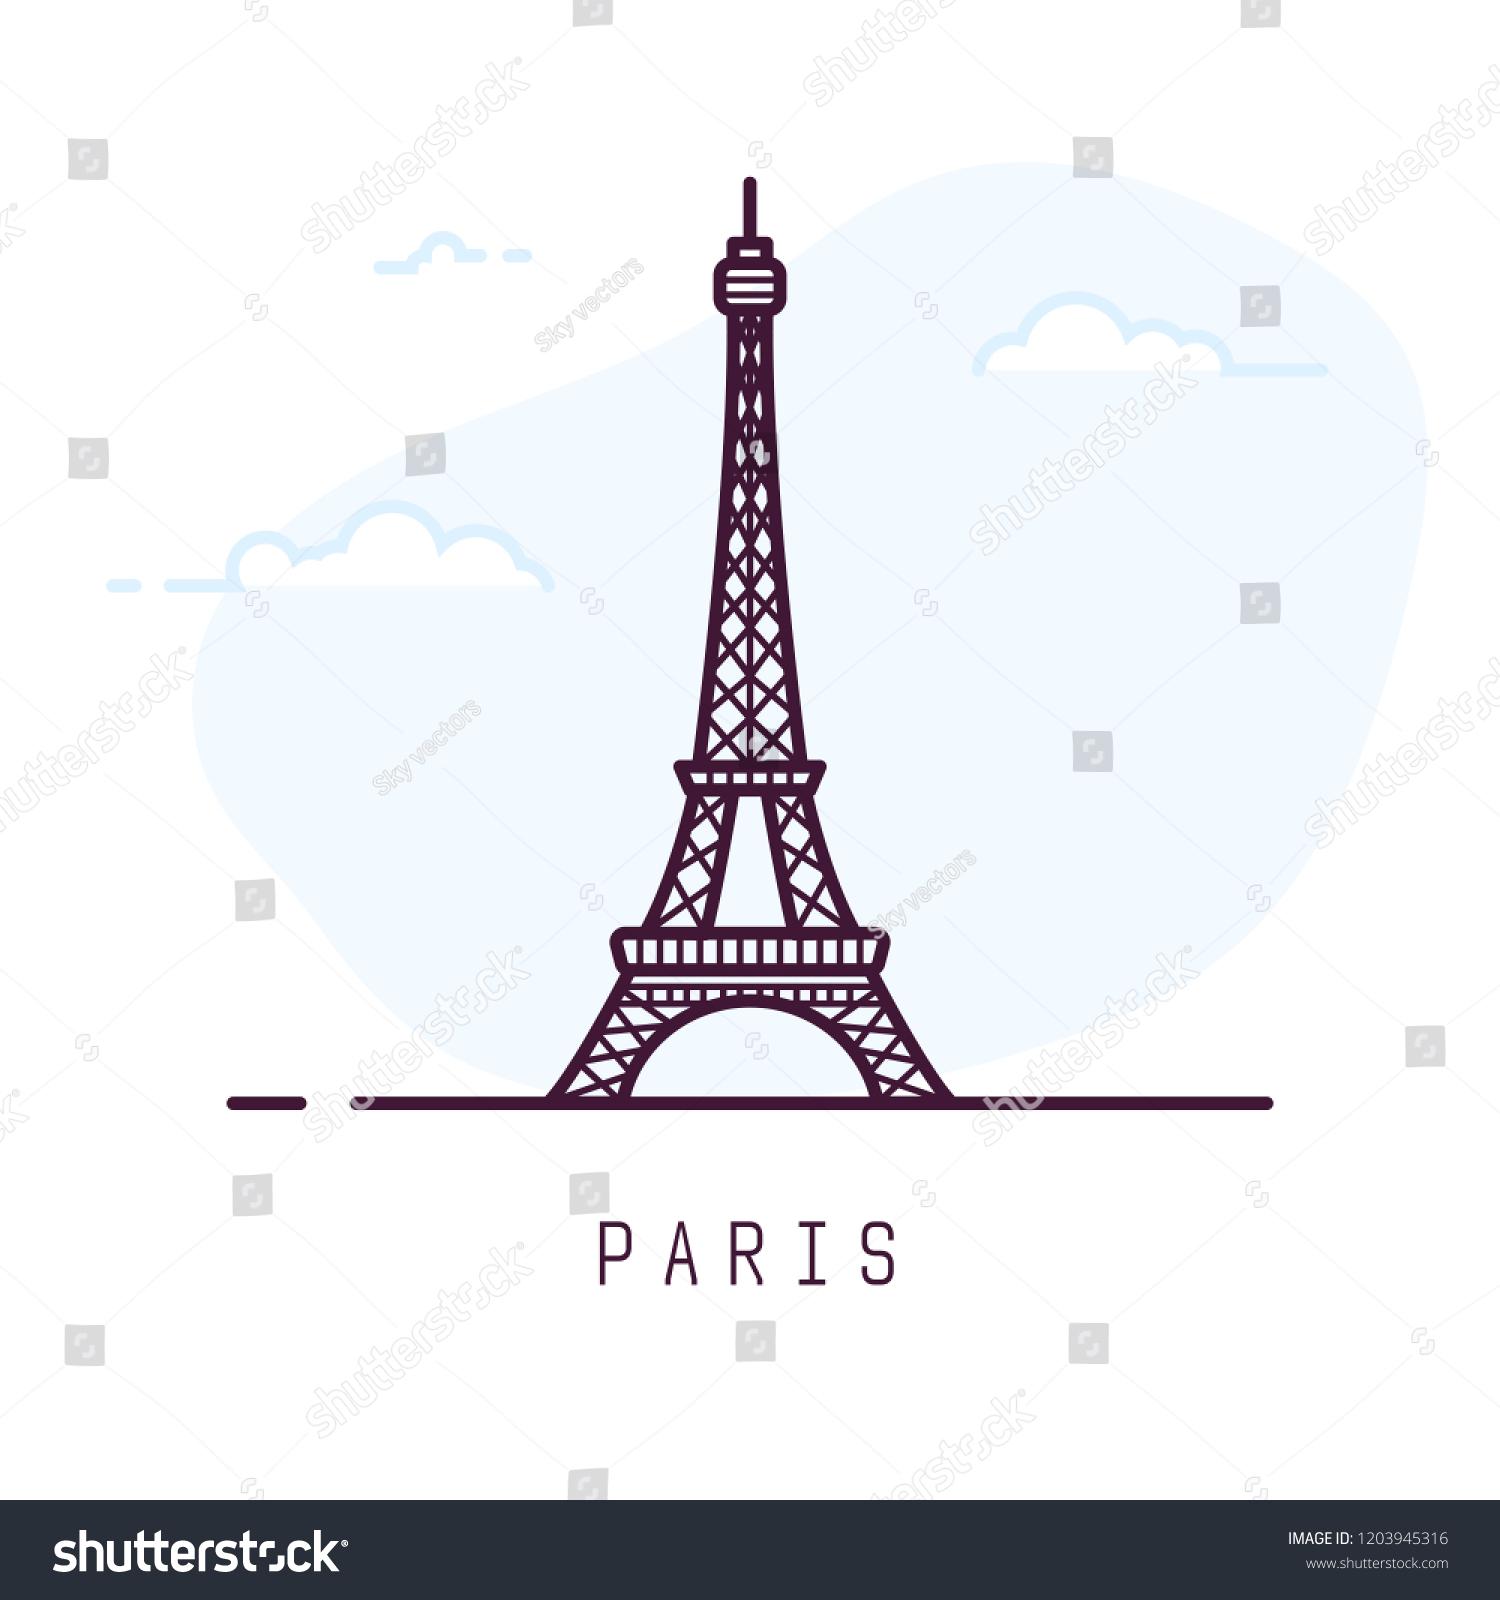 Paris city line style illustration. Famous Eiffel tower in Paris, France. Architecture city symbol of France. Outline building vector illustration. Sky clouds on background. Travel and tourism banner. #1203945316